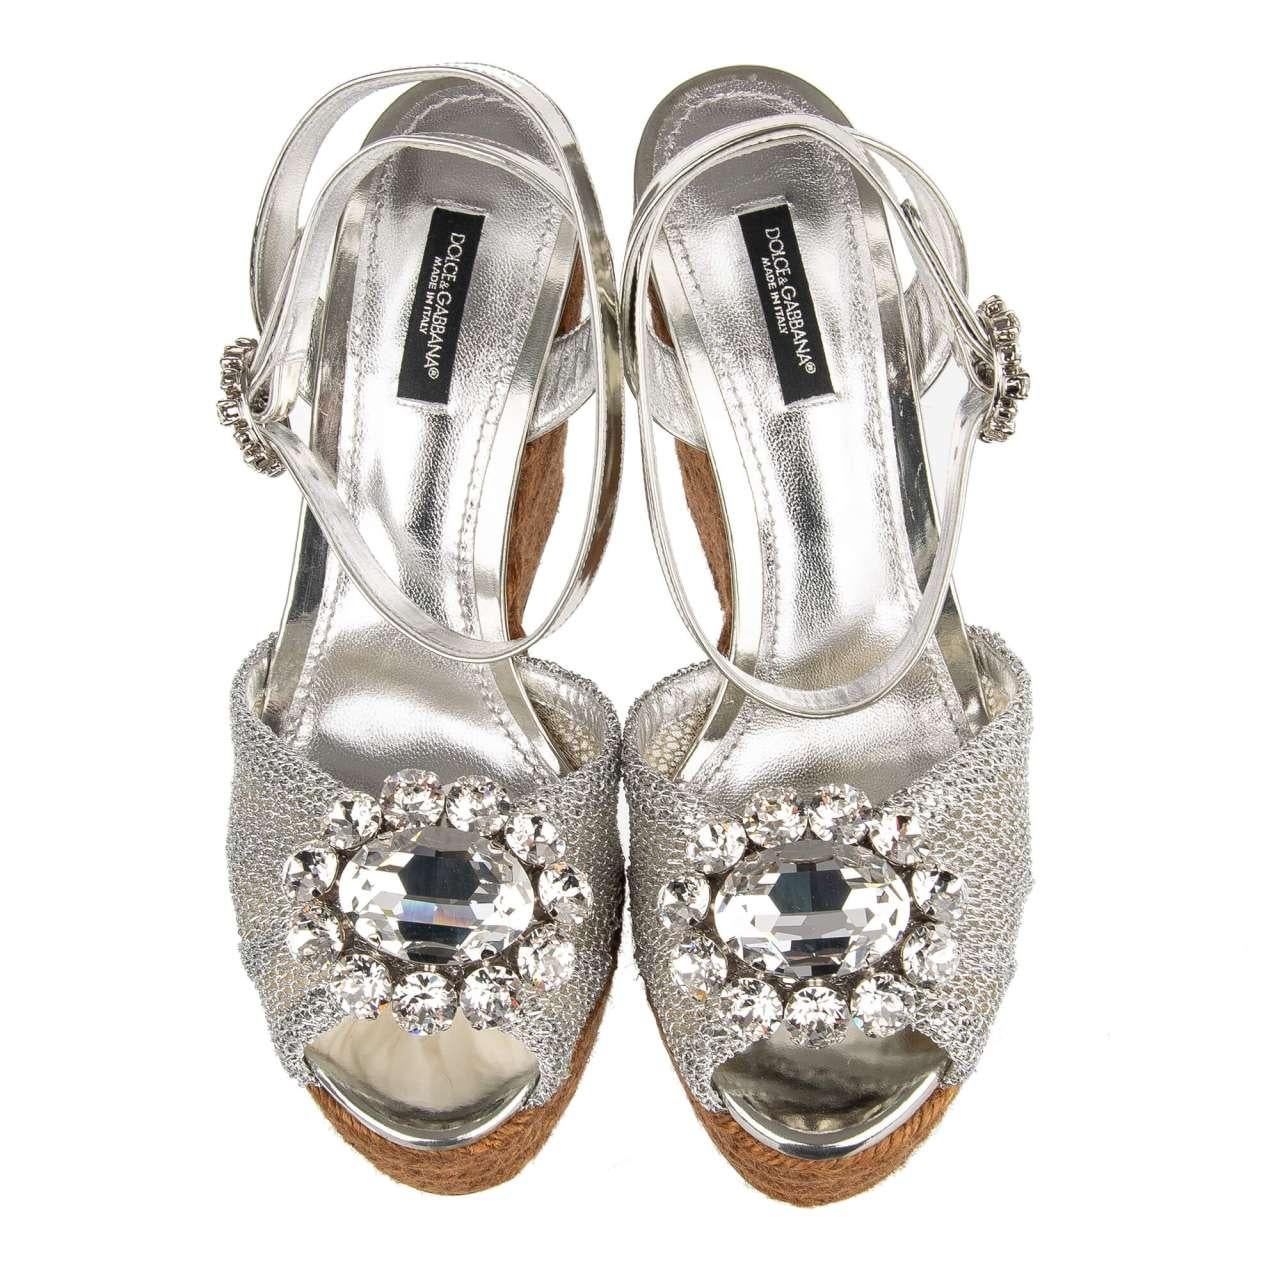 Dolce & Gabbana Plateau Sandals BIANCA with Crystal Brooch Silver EUR 37 For Sale 3